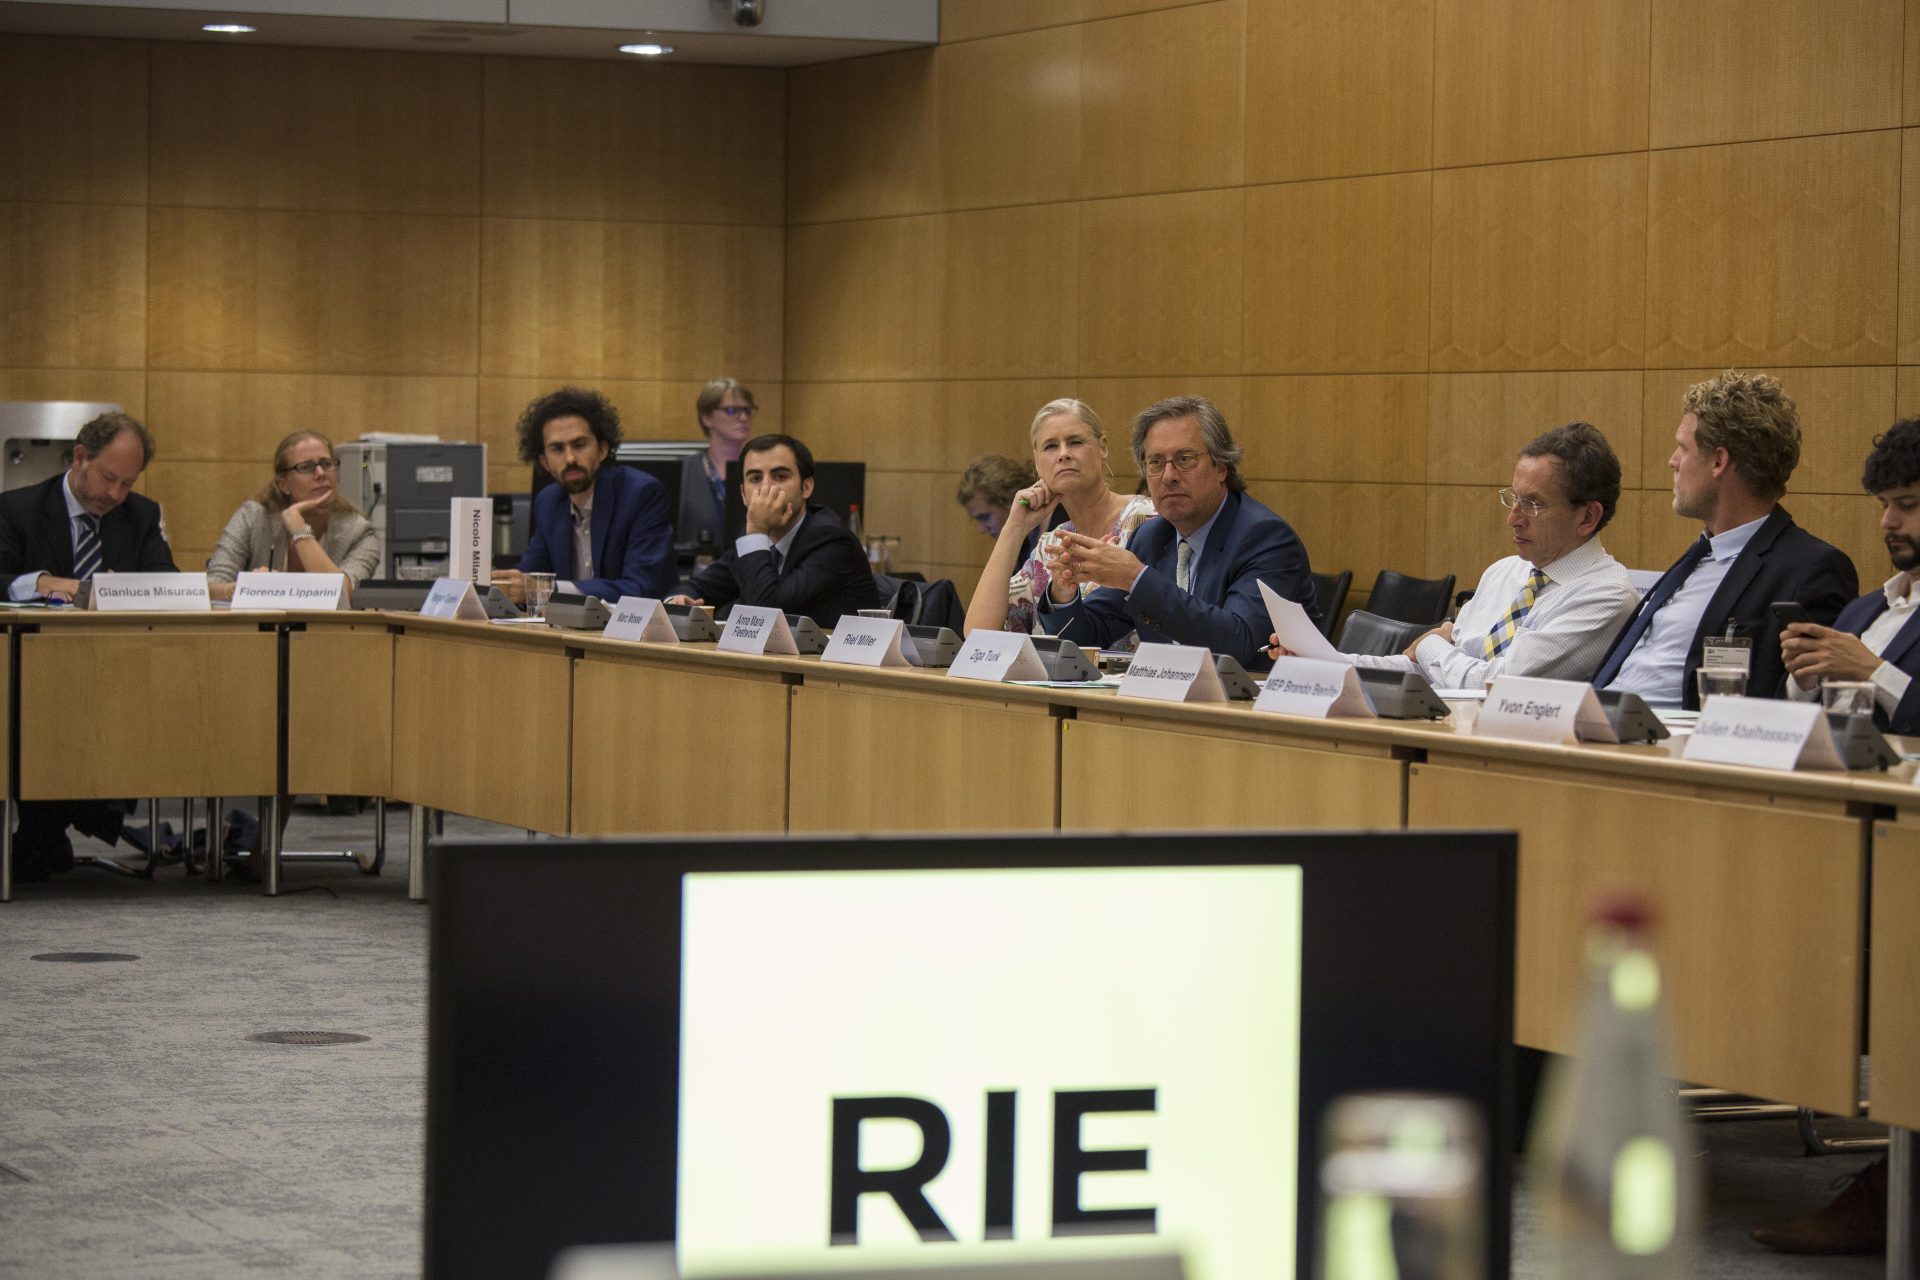 Some of the participants of the First annual meeting of Re-Imagine Europa at the OECD in Paris